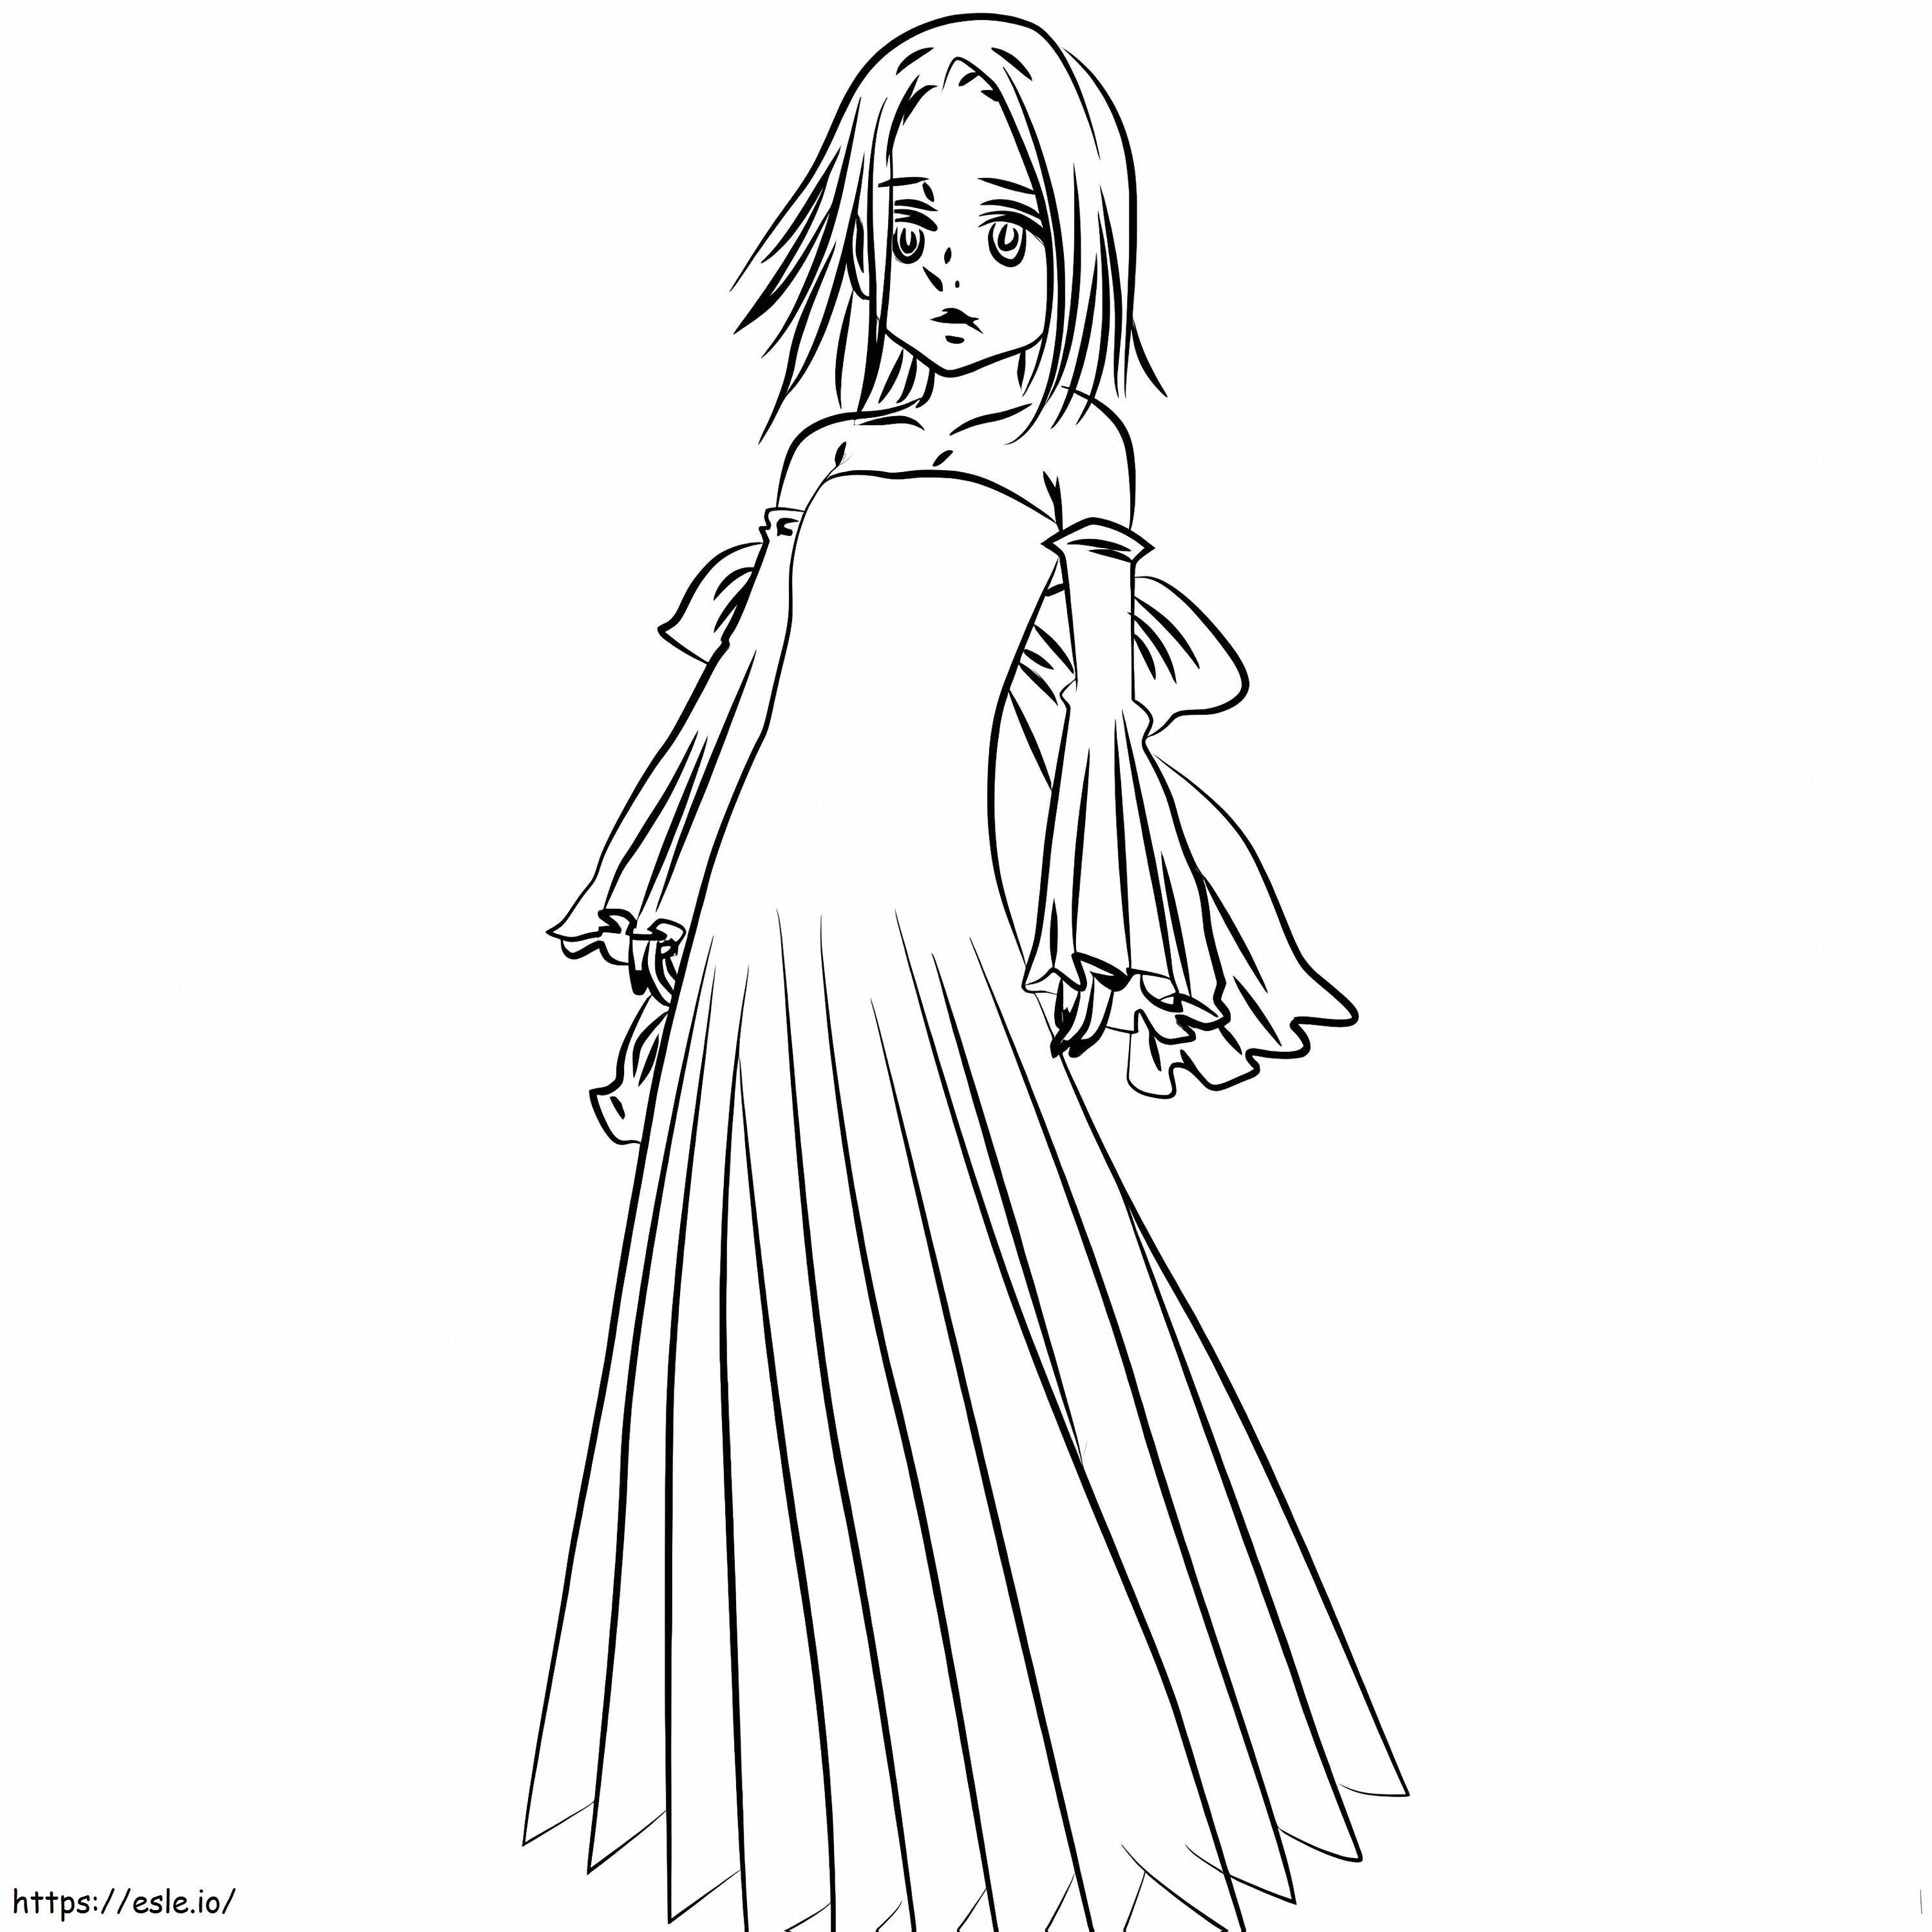 Elaine coloring page